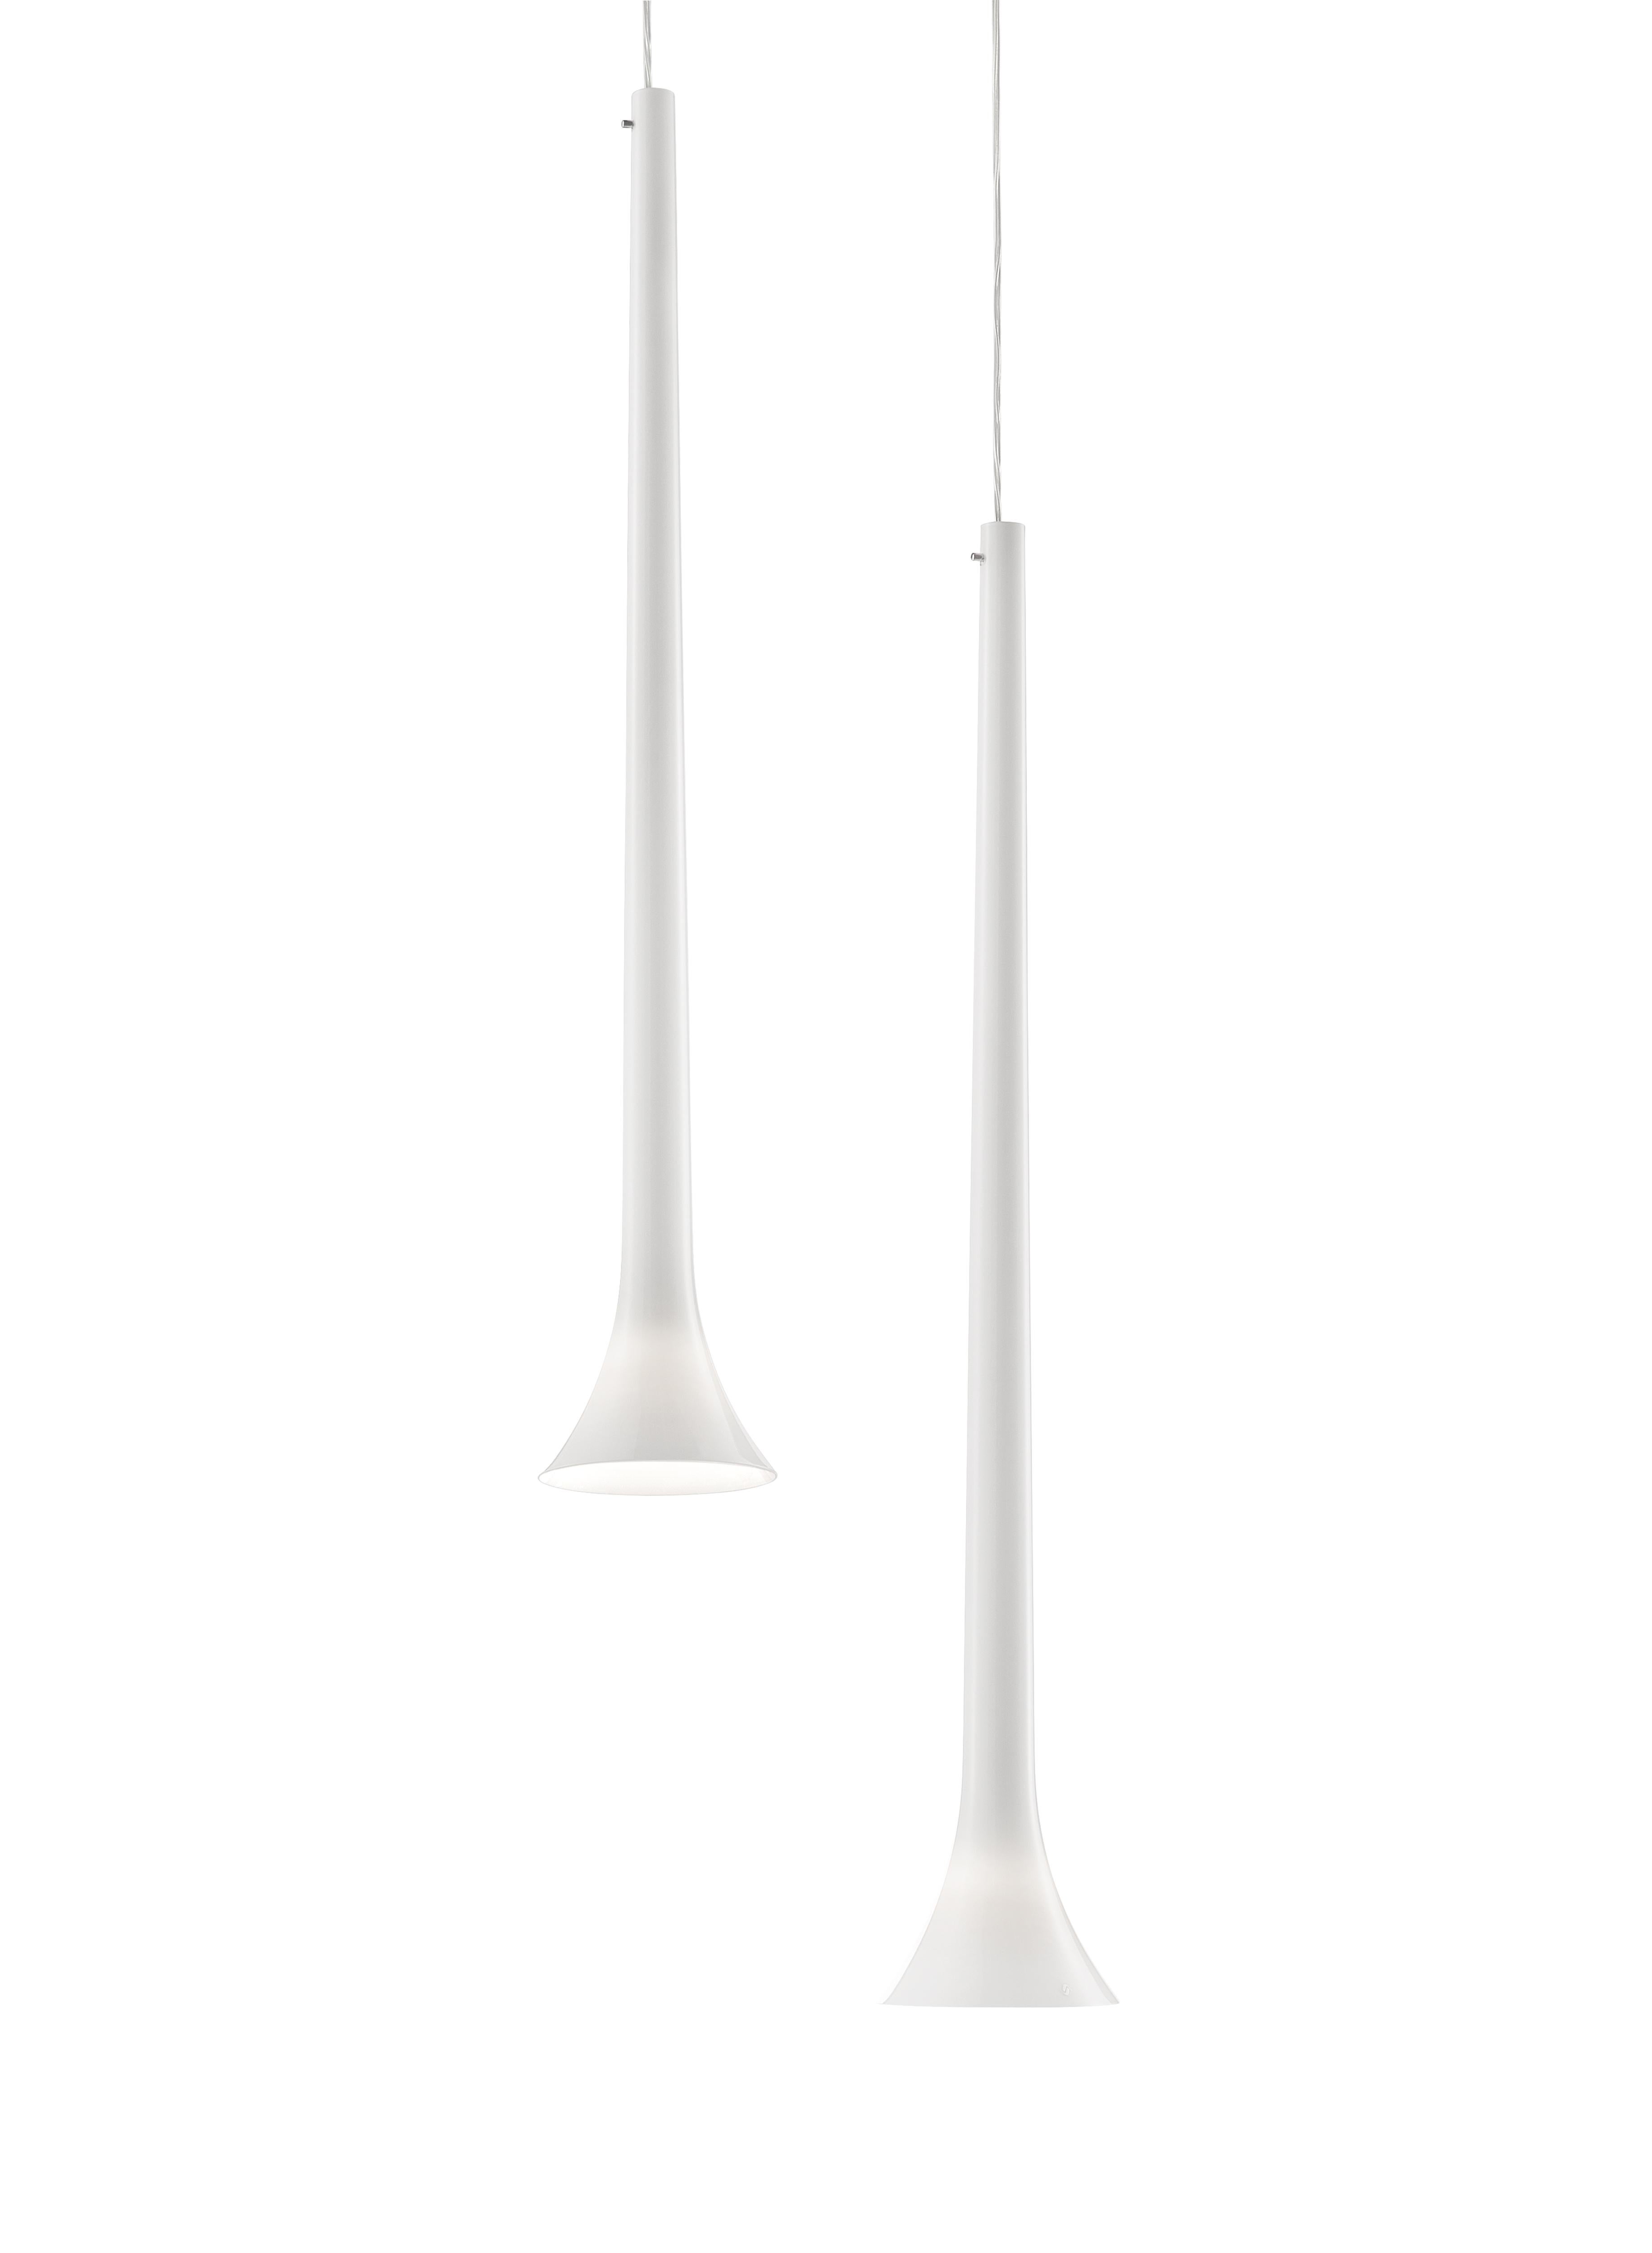 Sissi is an elegant mouth-blown glass in the shape of a narrow sinuous cone, suitable for installations requiring concentrated light.

Light source: 
1x50W GU10.